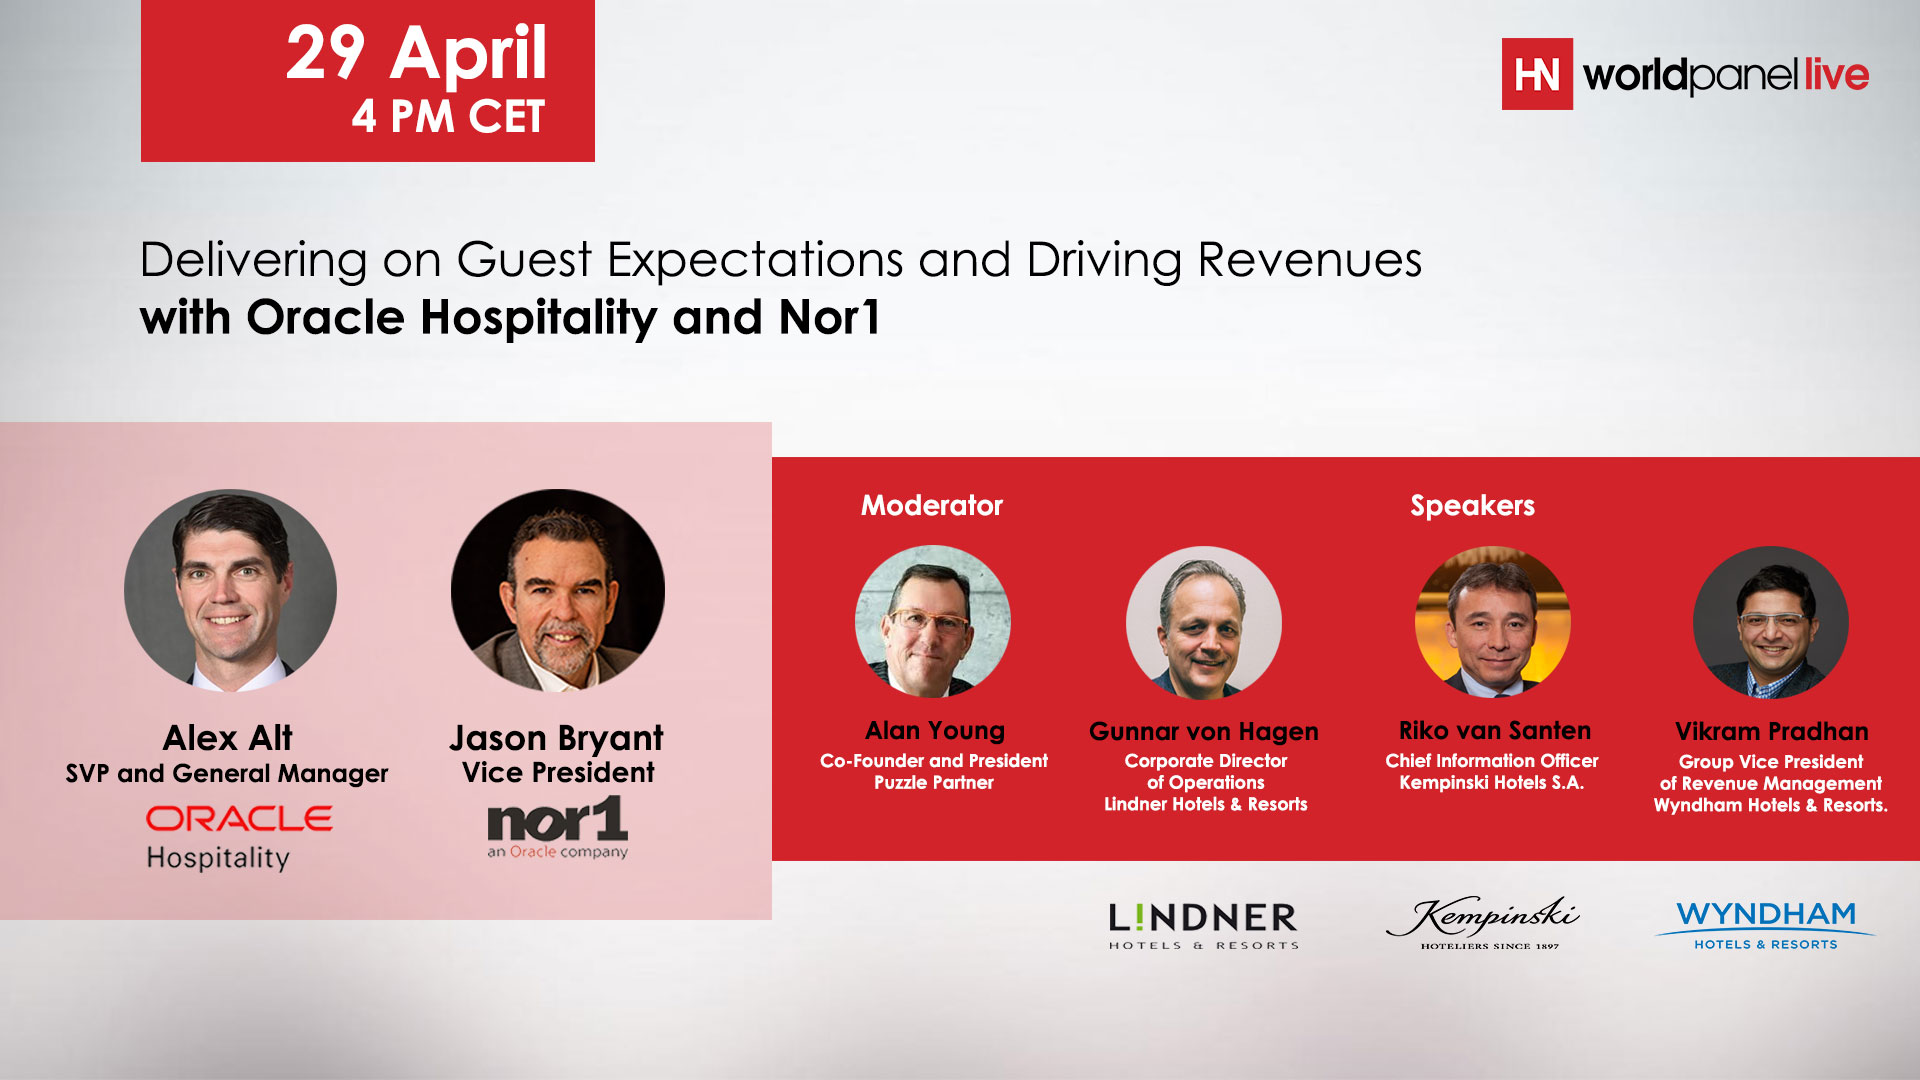 Delivering on Guest Expectations and Driving Revenues with Oracle Hospitality and Nor1